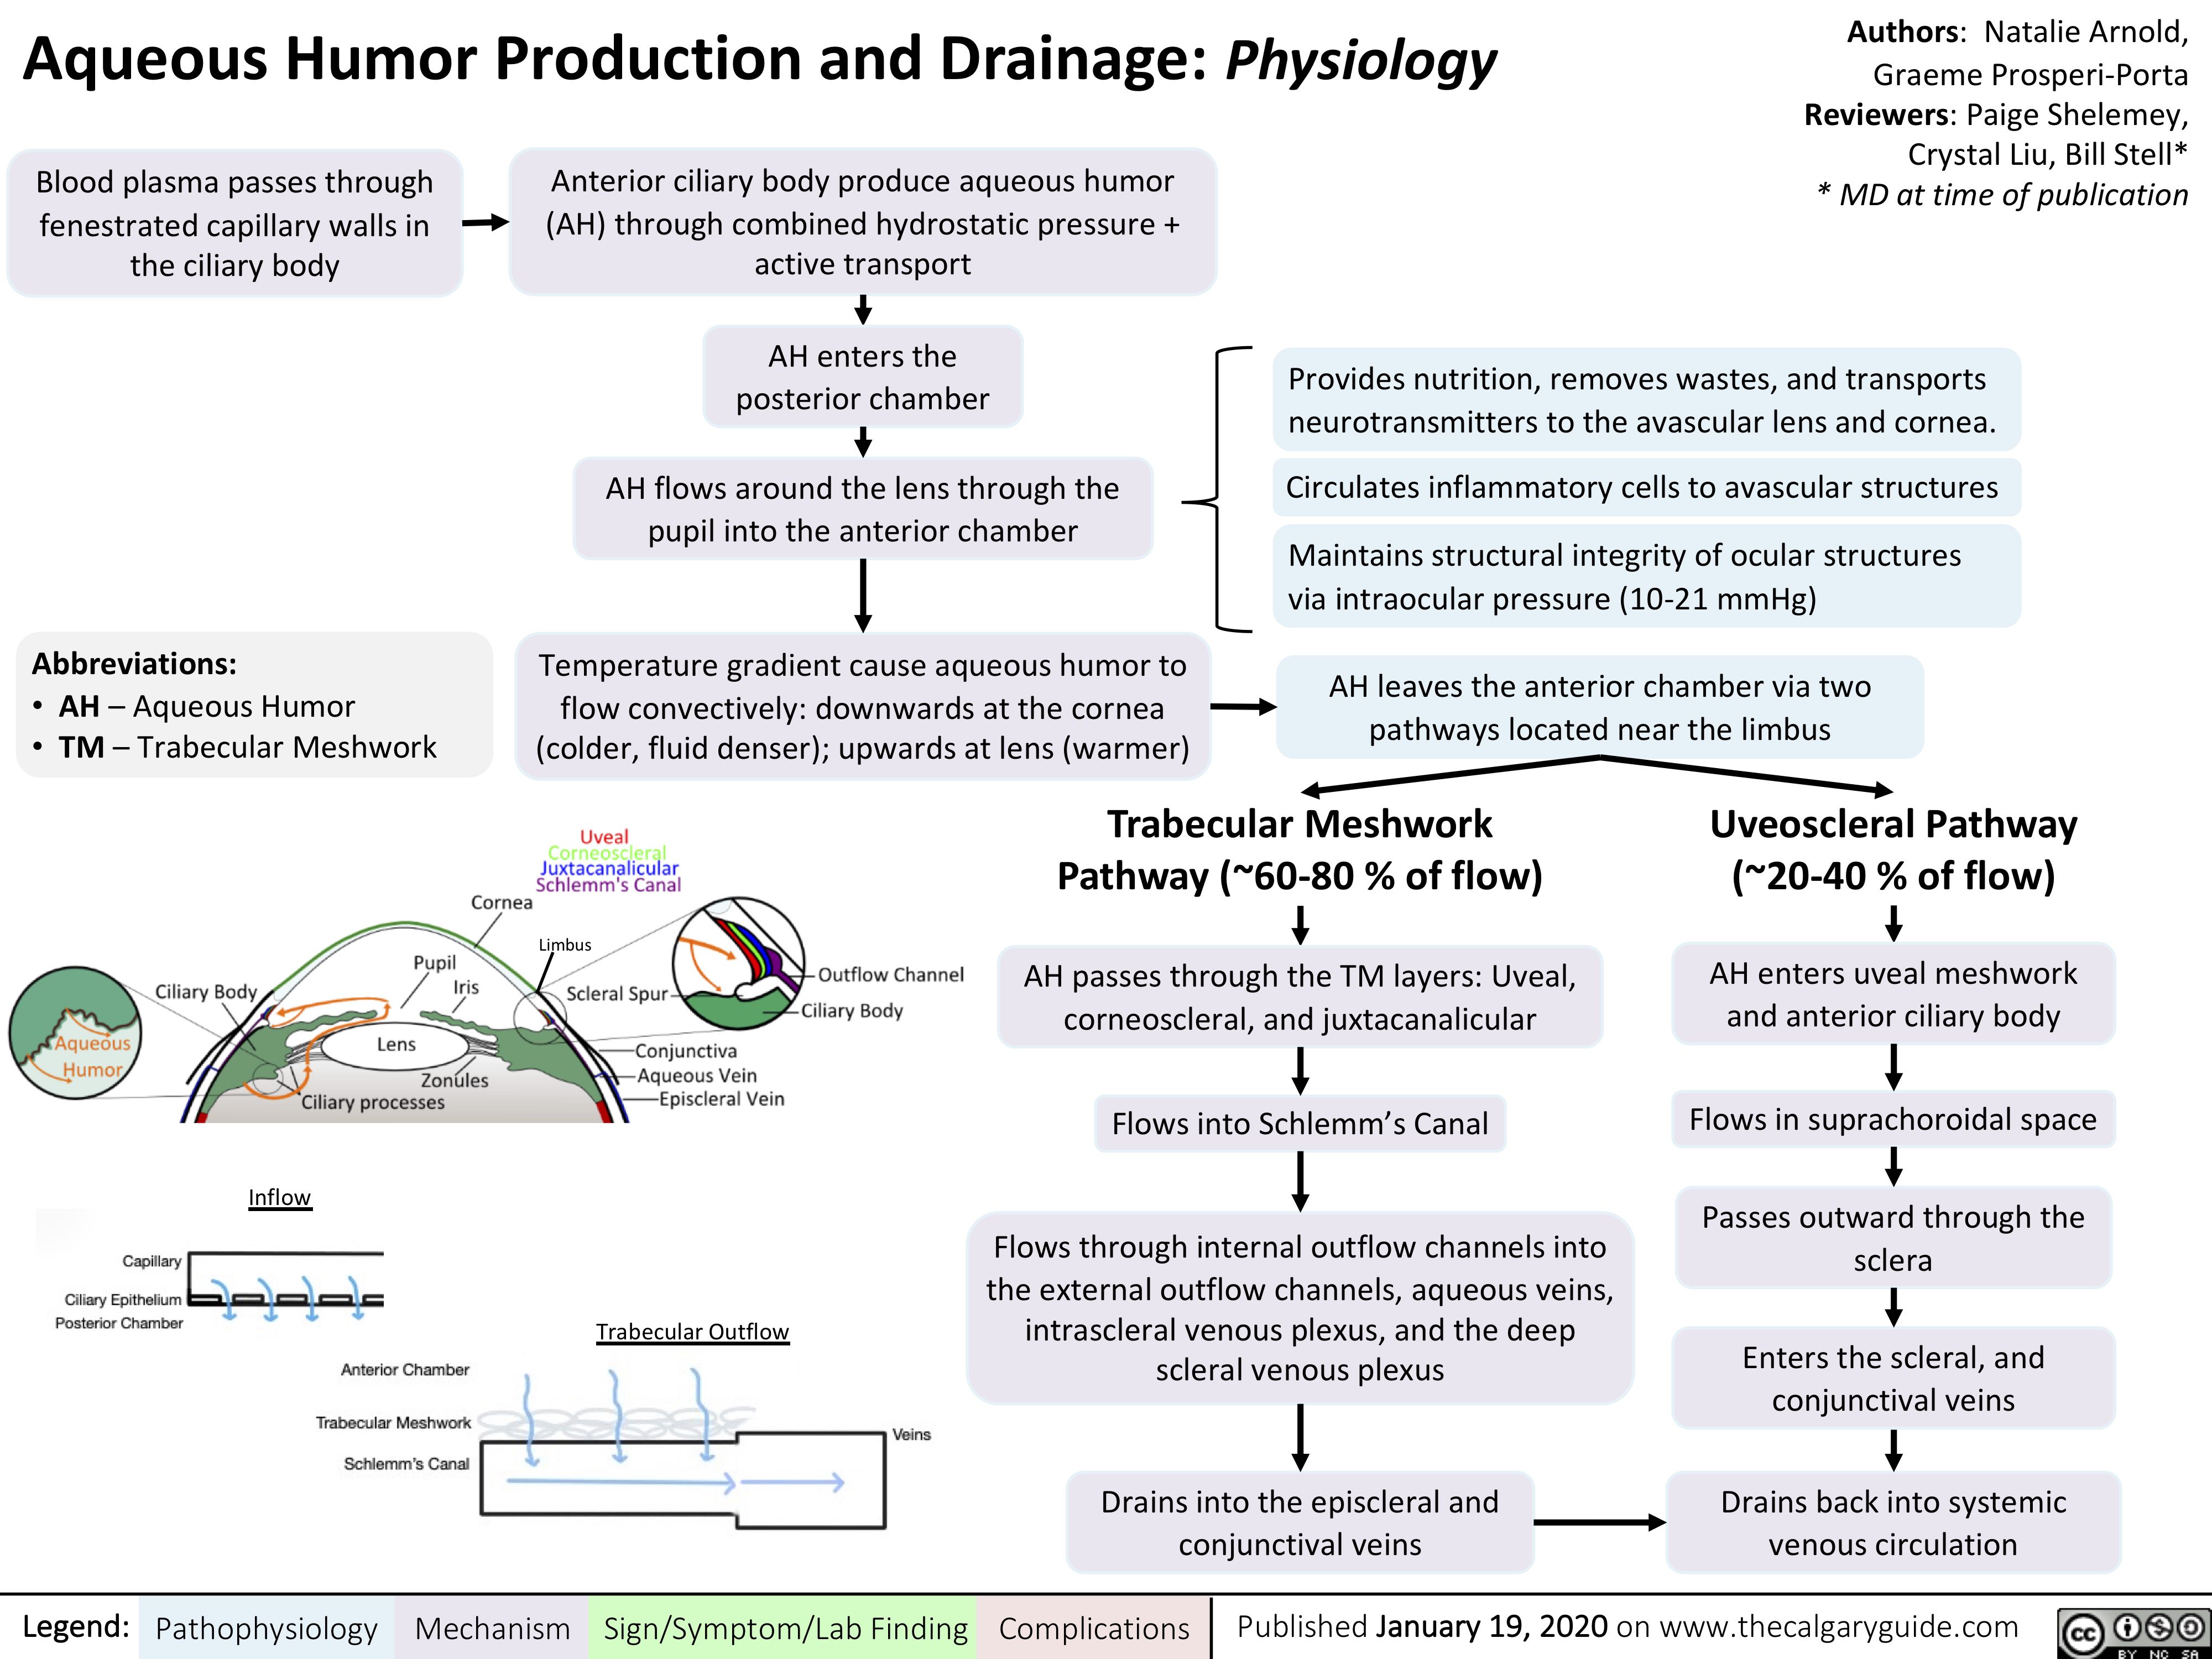 Aqueous Humor Production and Drainage: Physiology
Authors: Natalie Arnold, Graeme Prosperi-Porta Reviewers: Paige Shelemey, Crystal Liu, Bill Stell* * MD at time of publication
  Blood plasma passes through fenestrated capillary walls in the ciliary body
Anterior ciliary body produce aqueous humor (AH) through combined hydrostatic pressure + active transport
AH enters the posterior chamber
AH flows around the lens through the pupil into the anterior chamber
Temperature gradient cause aqueous humor to flow convectively: downwards at the cornea (colder, fluid denser); upwards at lens (warmer)
           Abbreviations:
• AH – Aqueous Humor
• TM – Trabecular Meshwork
Provides nutrition, removes wastes, and transports neurotransmitters to the avascular lens and cornea.
Circulates inflammatory cells to avascular structures
Maintains structural integrity of ocular structures via intraocular pressure (10-21 mmHg)
AH leaves the anterior chamber via two pathways located near the limbus
       Limbus
Trabecular Meshwork Pathway (~60-80 % of flow)
AH passes through the TM layers: Uveal, corneoscleral, and juxtacanalicular
Flows into Schlemm’s Canal
Flows through internal outflow channels into the external outflow channels, aqueous veins, intrascleral venous plexus, and the deep scleral venous plexus
Drains into the episcleral and conjunctival veins
Uveoscleral Pathway (~20-40 % of flow)
AH enters uveal meshwork and anterior ciliary body
Flows in suprachoroidal space
Passes outward through the sclera
Enters the scleral, and conjunctival veins
Drains back into systemic venous circulation
         Inflow
     Trabecular Outflow
        Legend:
 Pathophysiology
 Mechanism
 Sign/Symptom/Lab Finding
 Complications
Published January 19, 2020 on www.thecalgaryguide.com
  